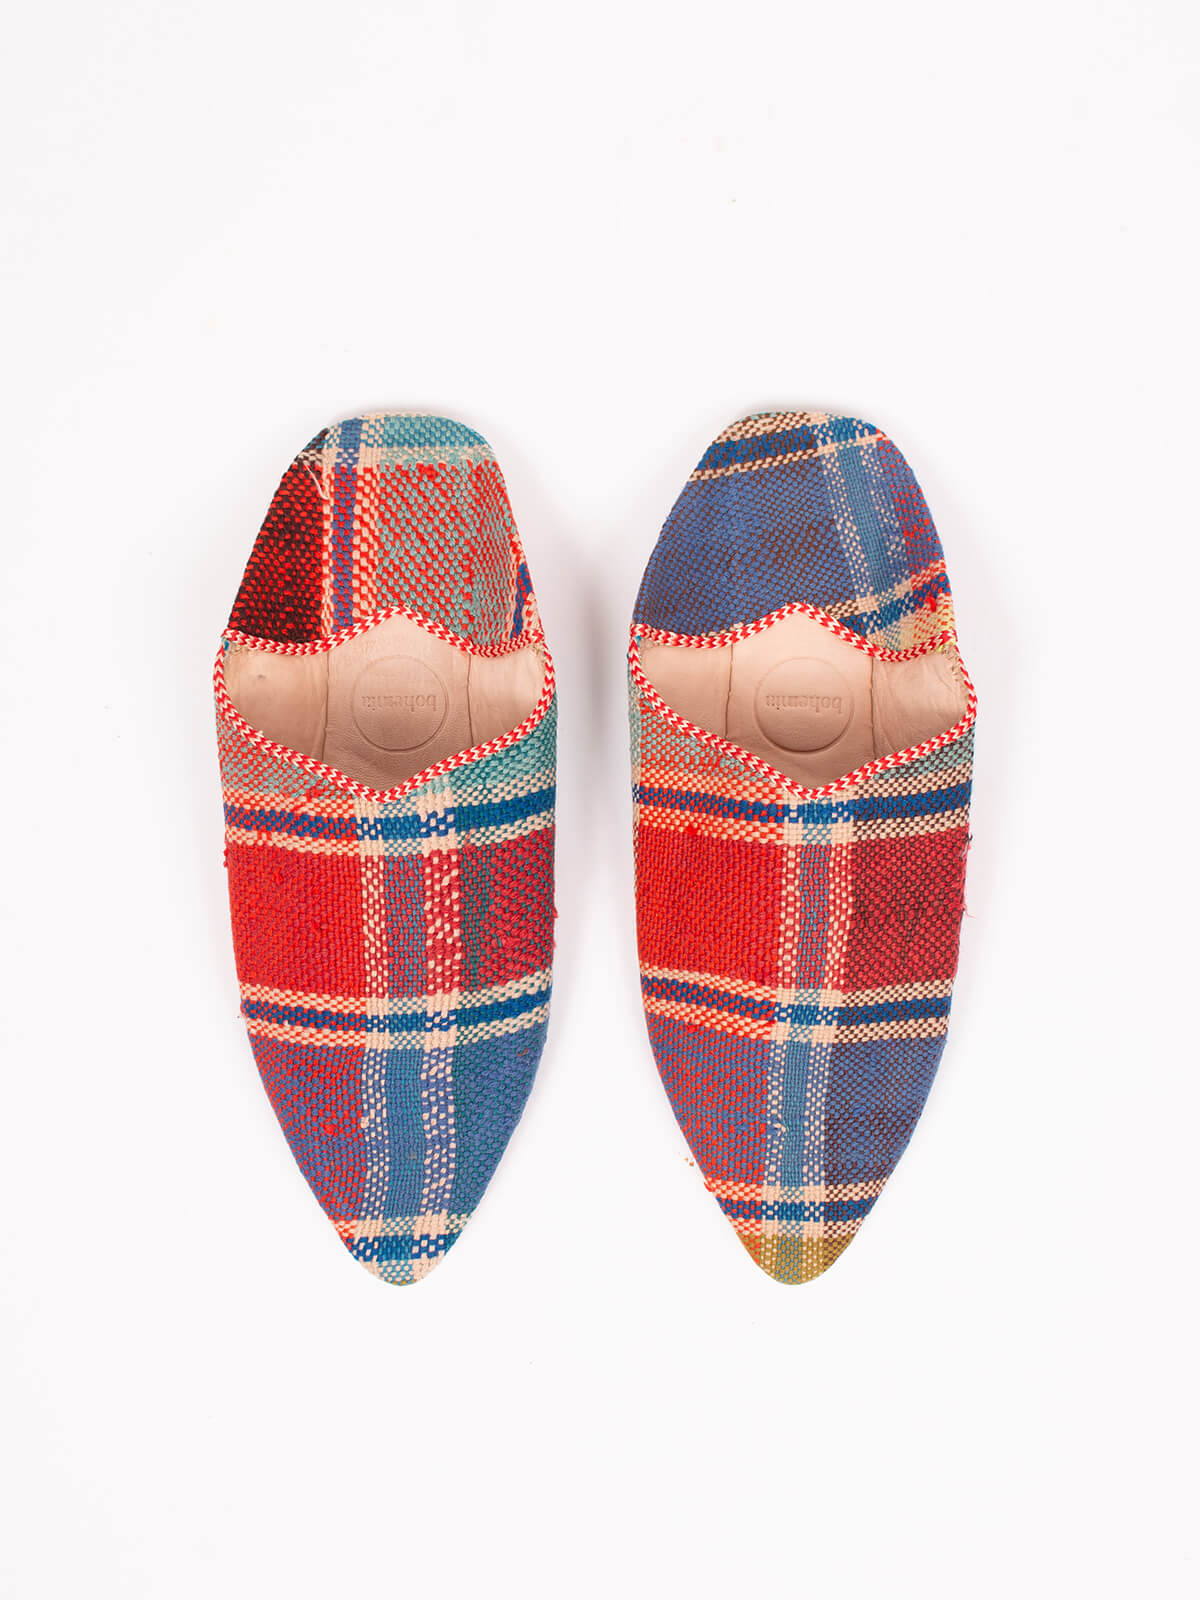 Moroccan Boujad Pointed Babouche Slippers, Fez Check